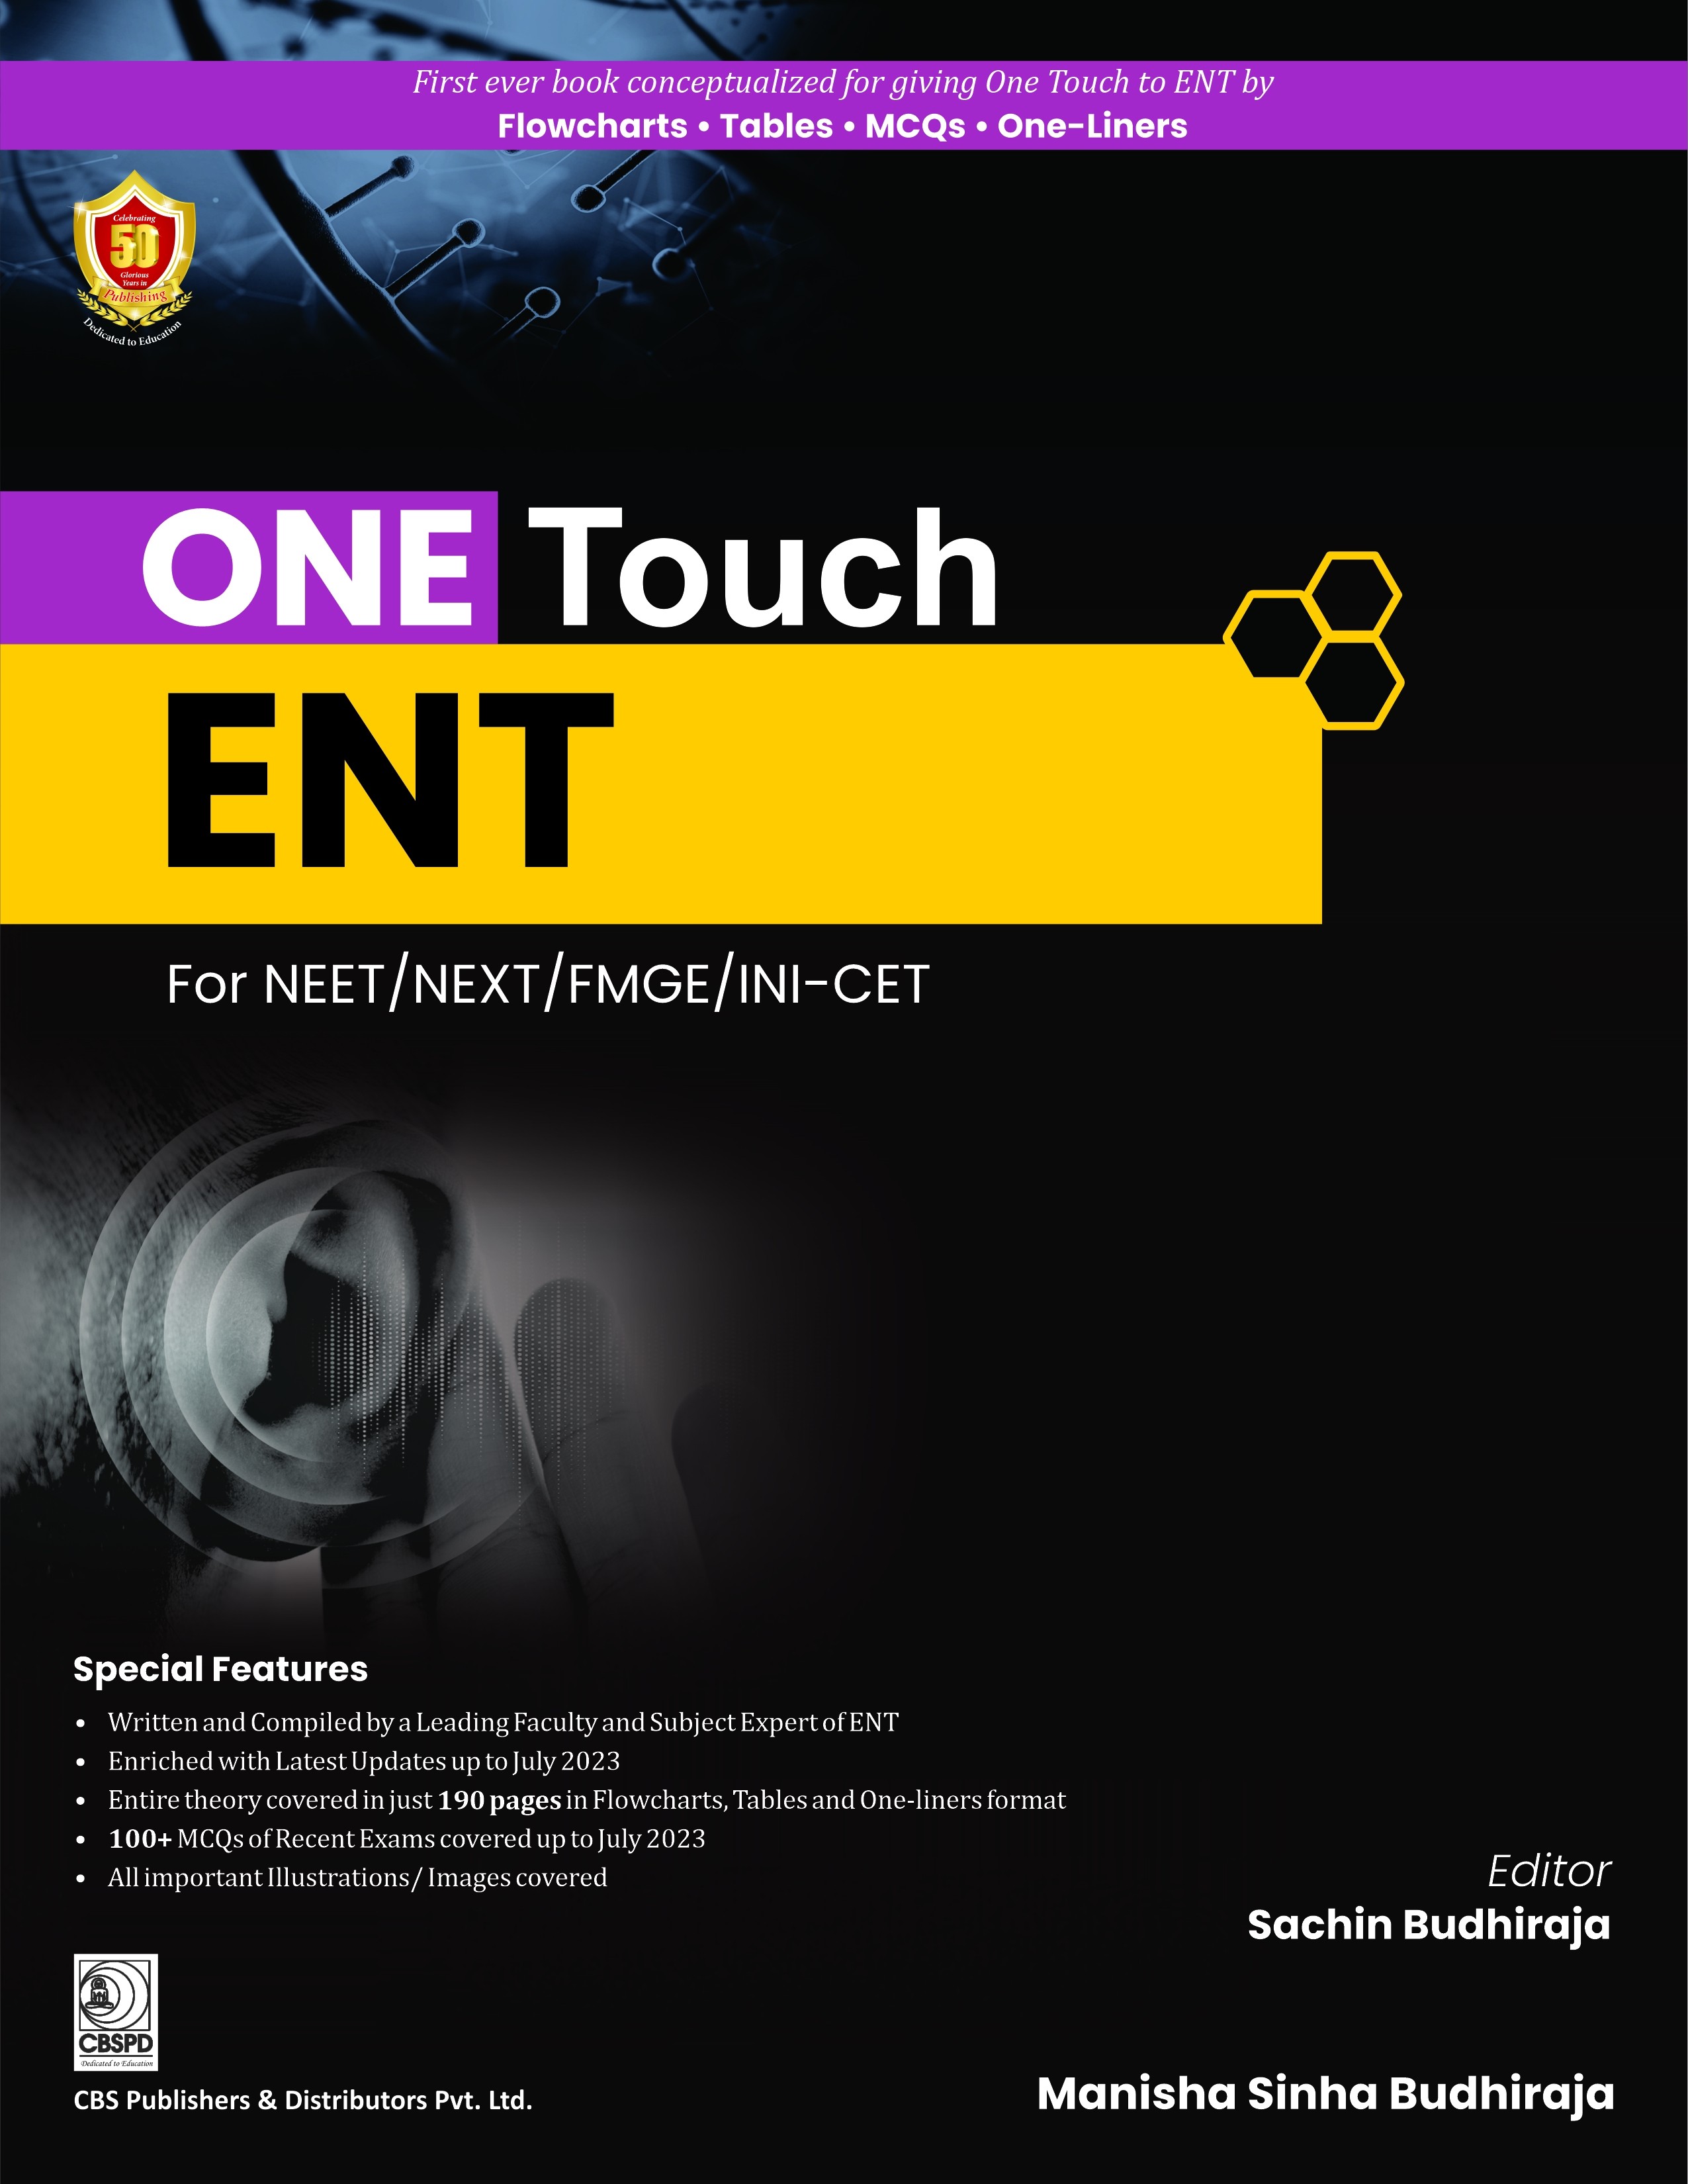 ONE TOUCH ENT for NEET/NEXT/FMGE/INI-CET